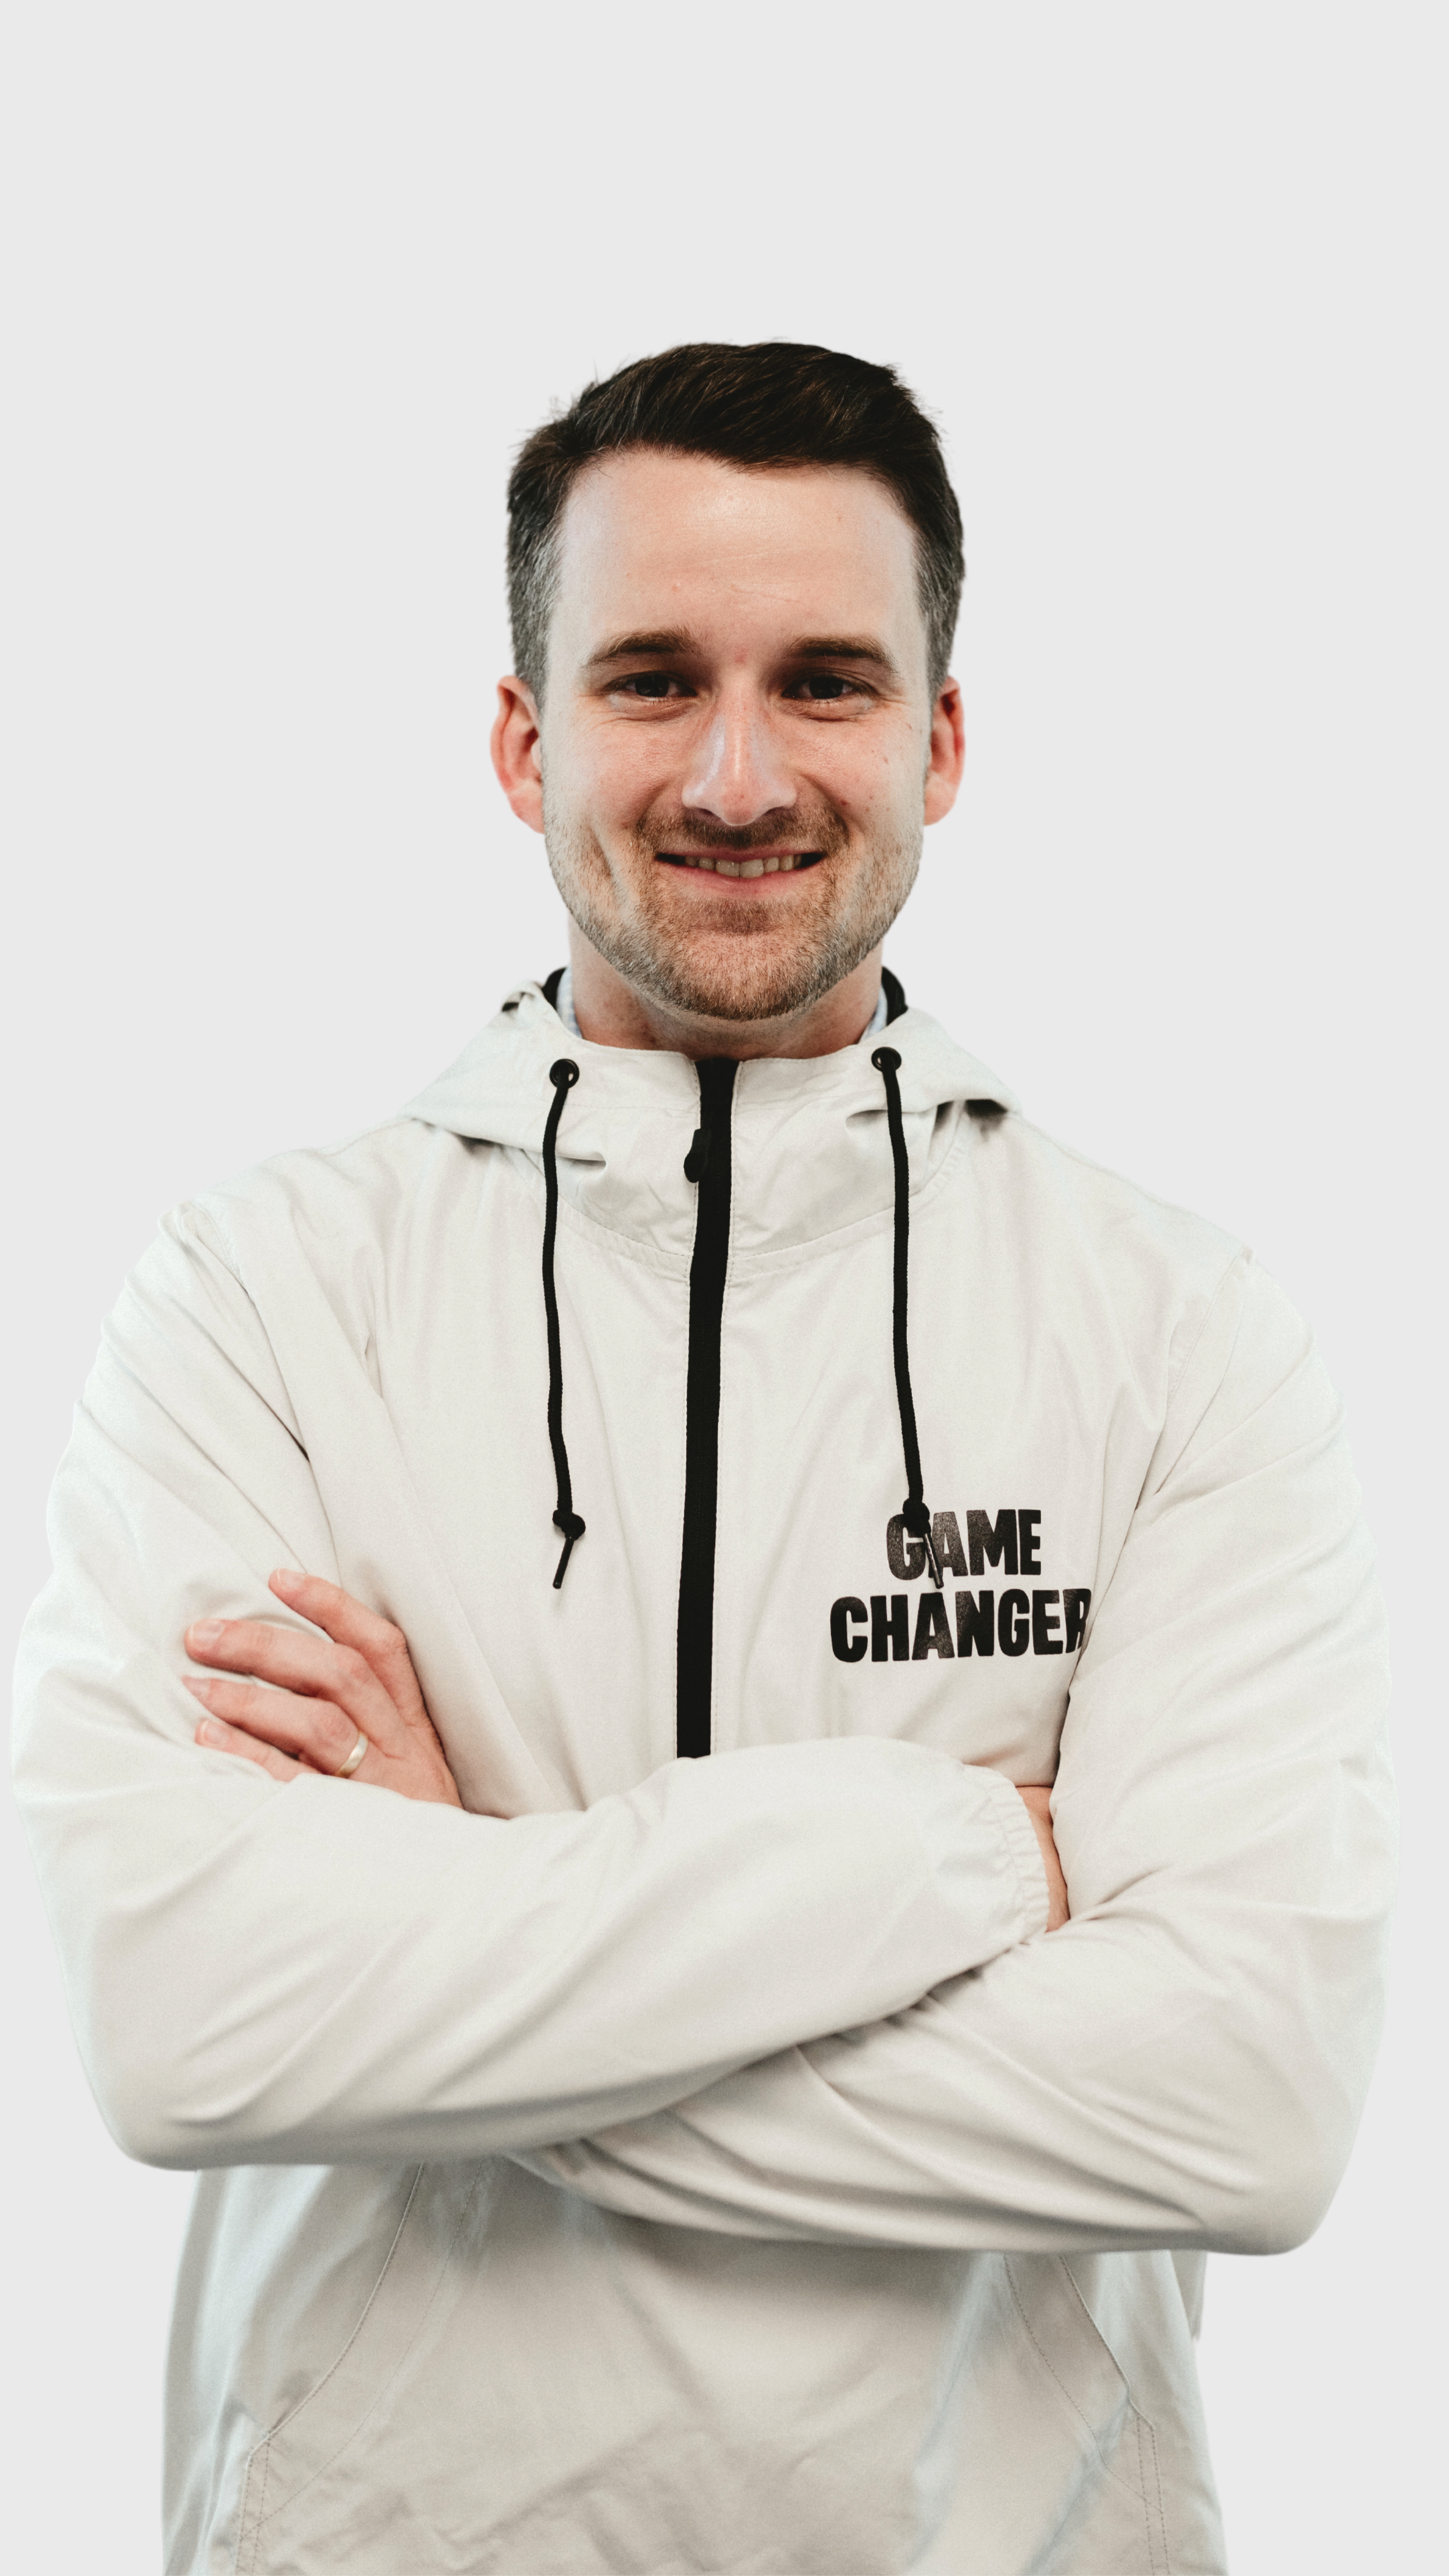 Game Changer Windbreaker - Increase Marketplace Powered by Imperial Distr. Co., Inc.